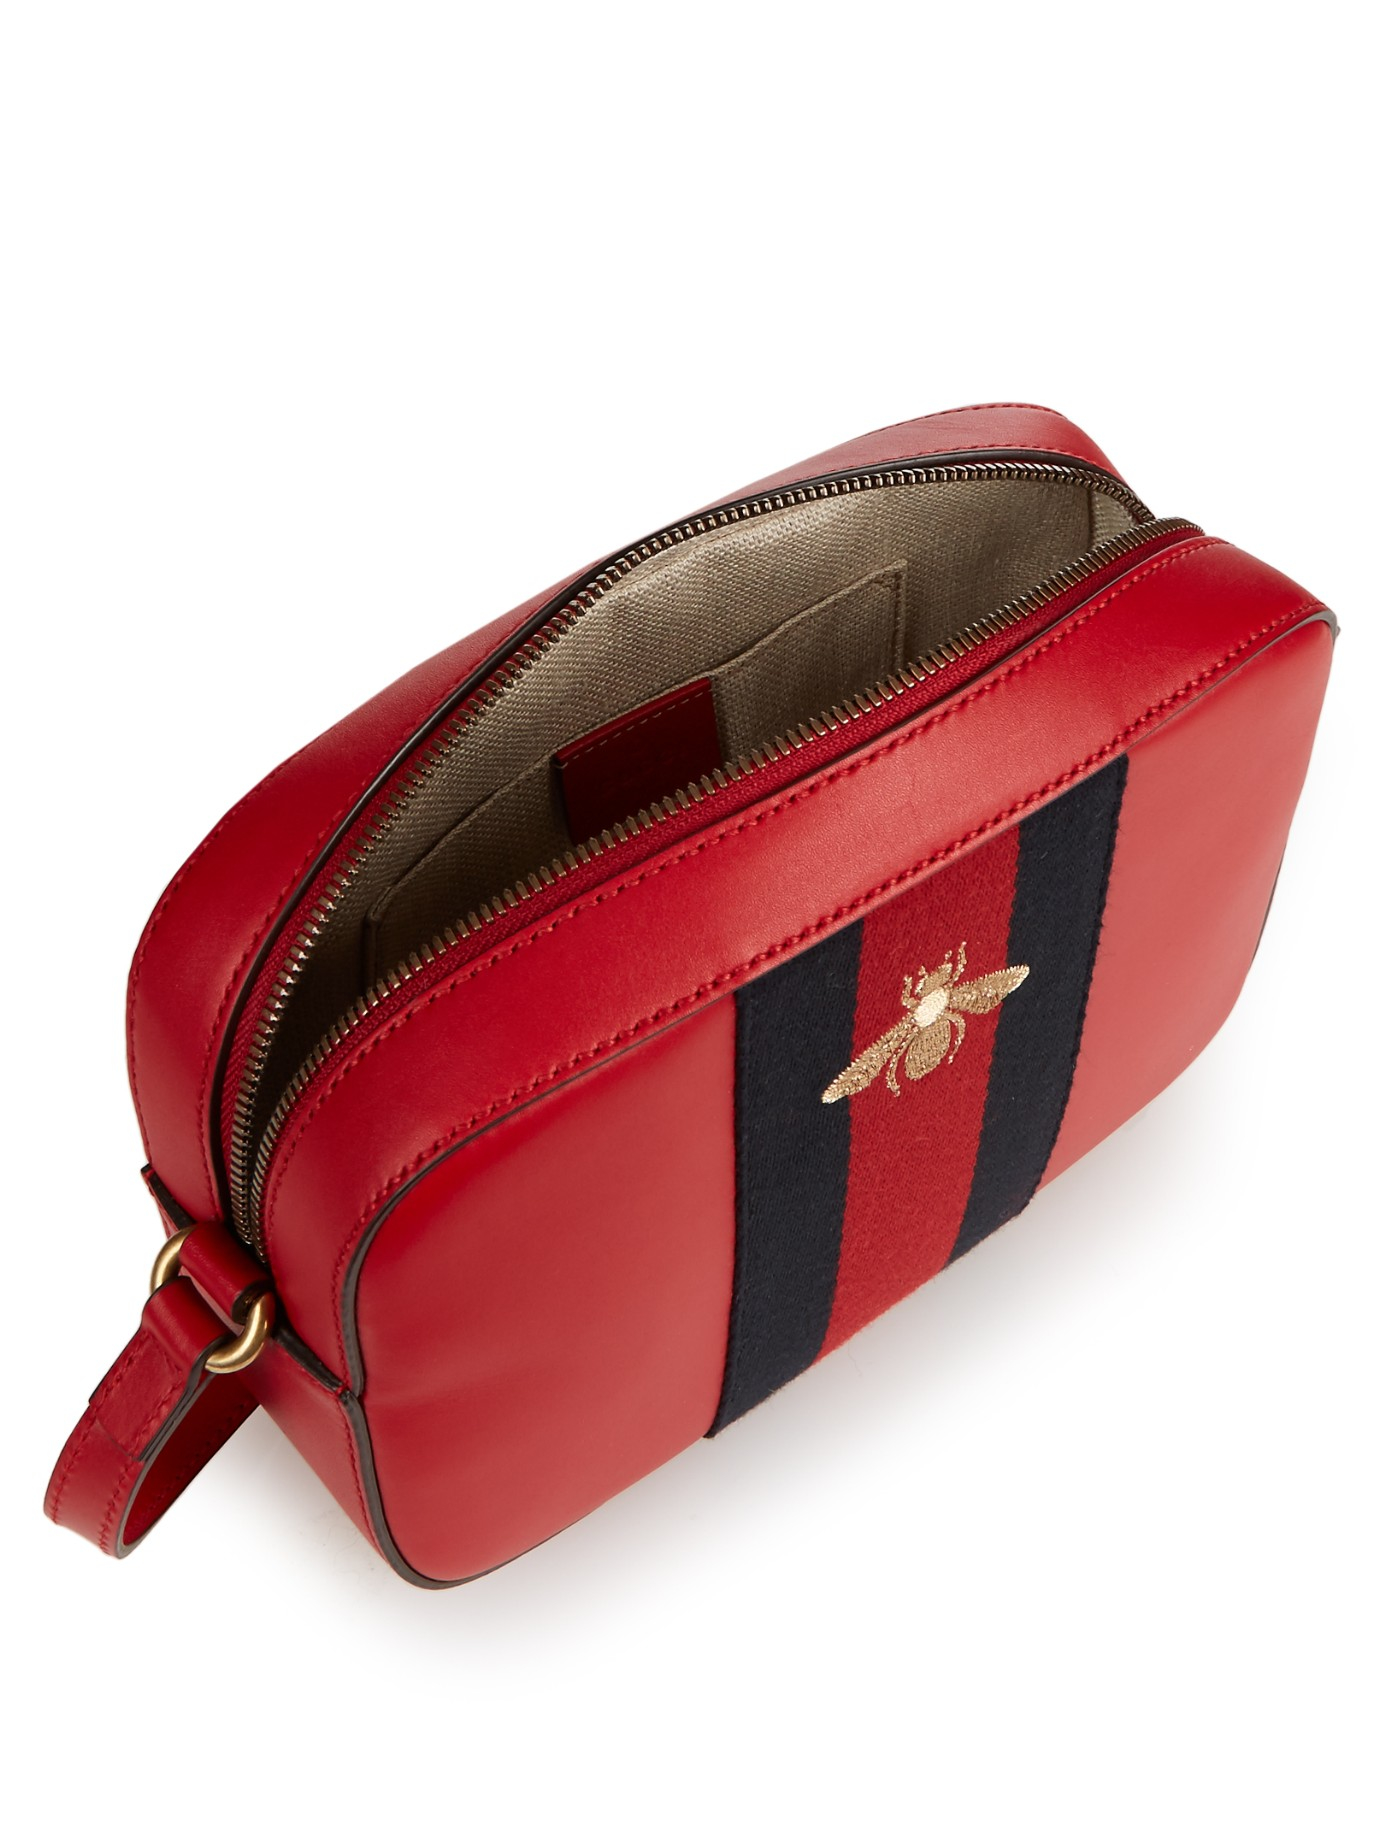 Gucci Line Bee-Embroidered Leather Cross-Body Bag in Red | Lyst